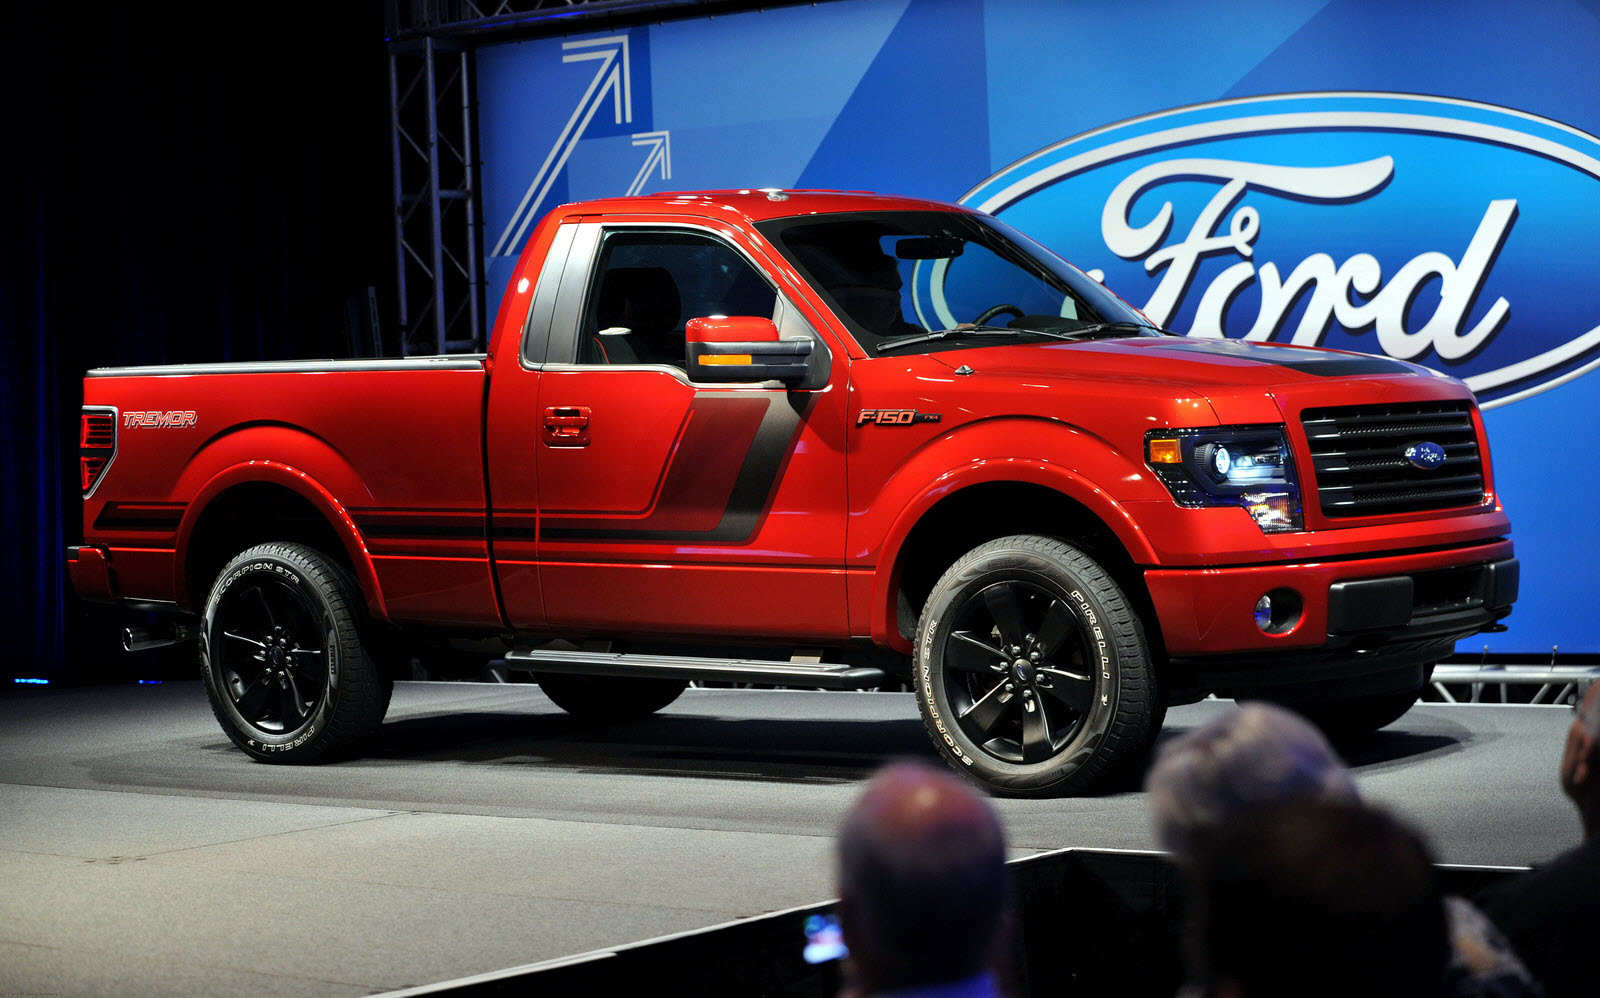 ALL-NEW 2014 FORD F-150 TREMOR IS WORLD'S FIRST ECOBOOST-POWERED SPORT TRUCK